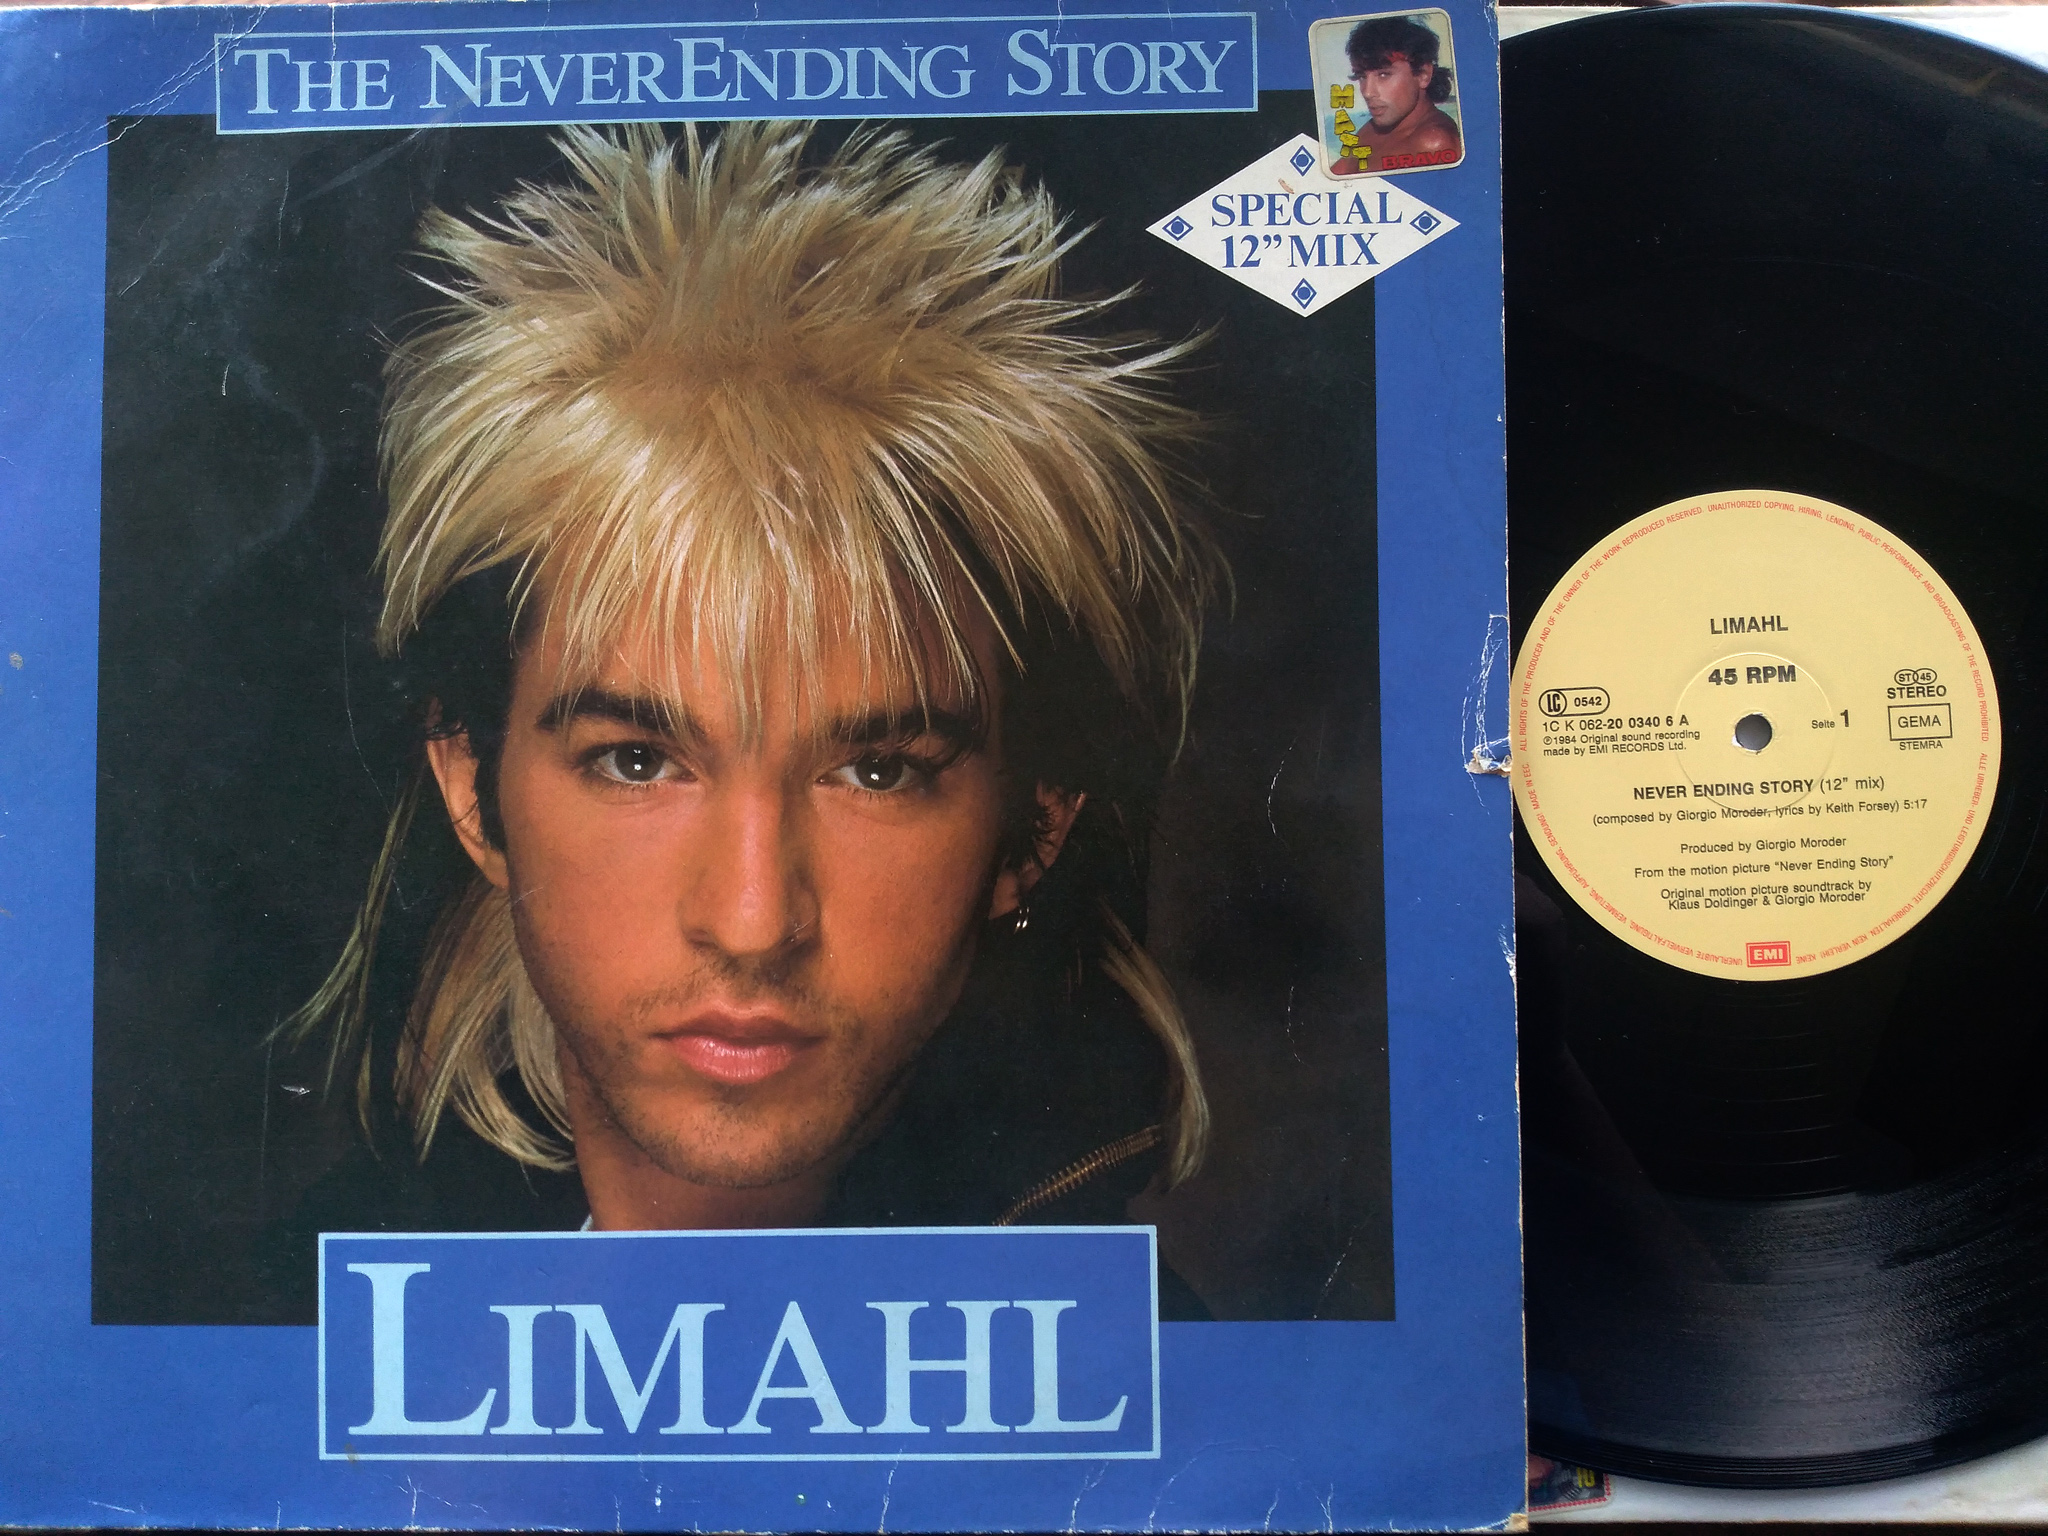 Limahl - The Neverending Story